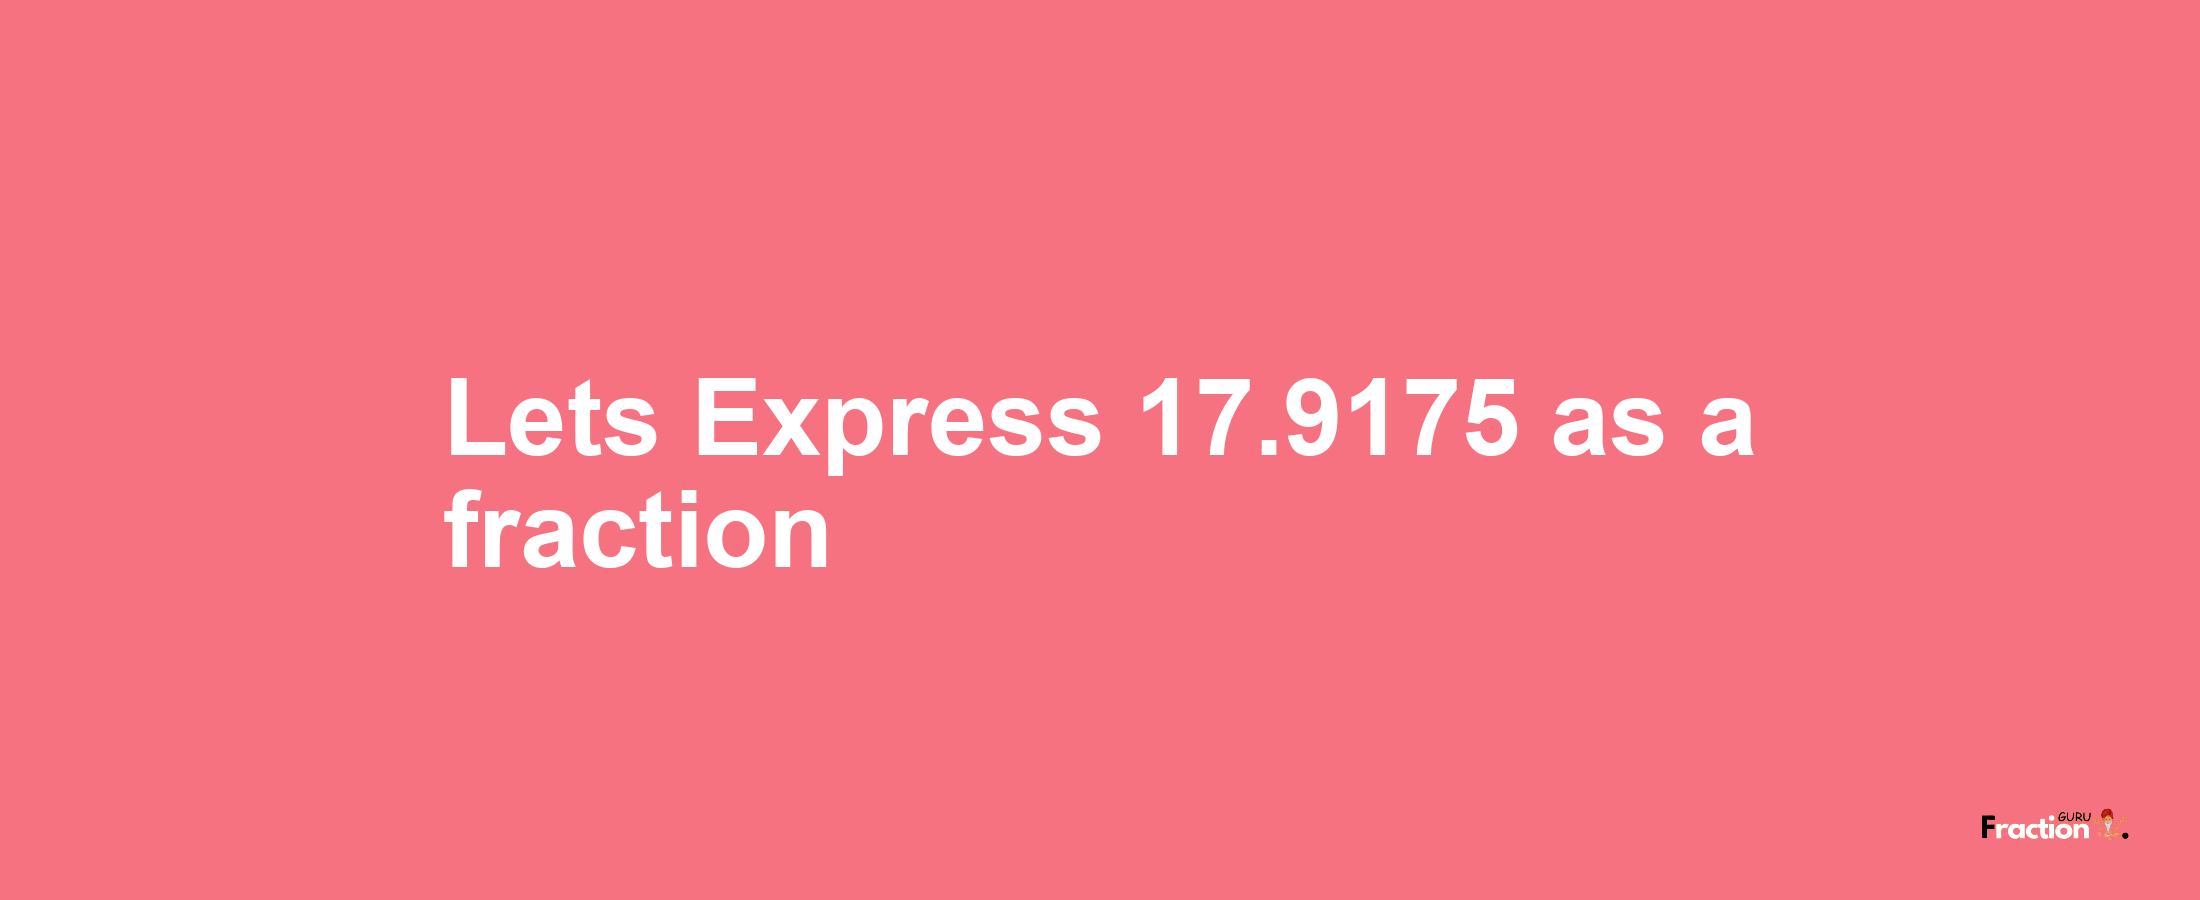 Lets Express 17.9175 as afraction